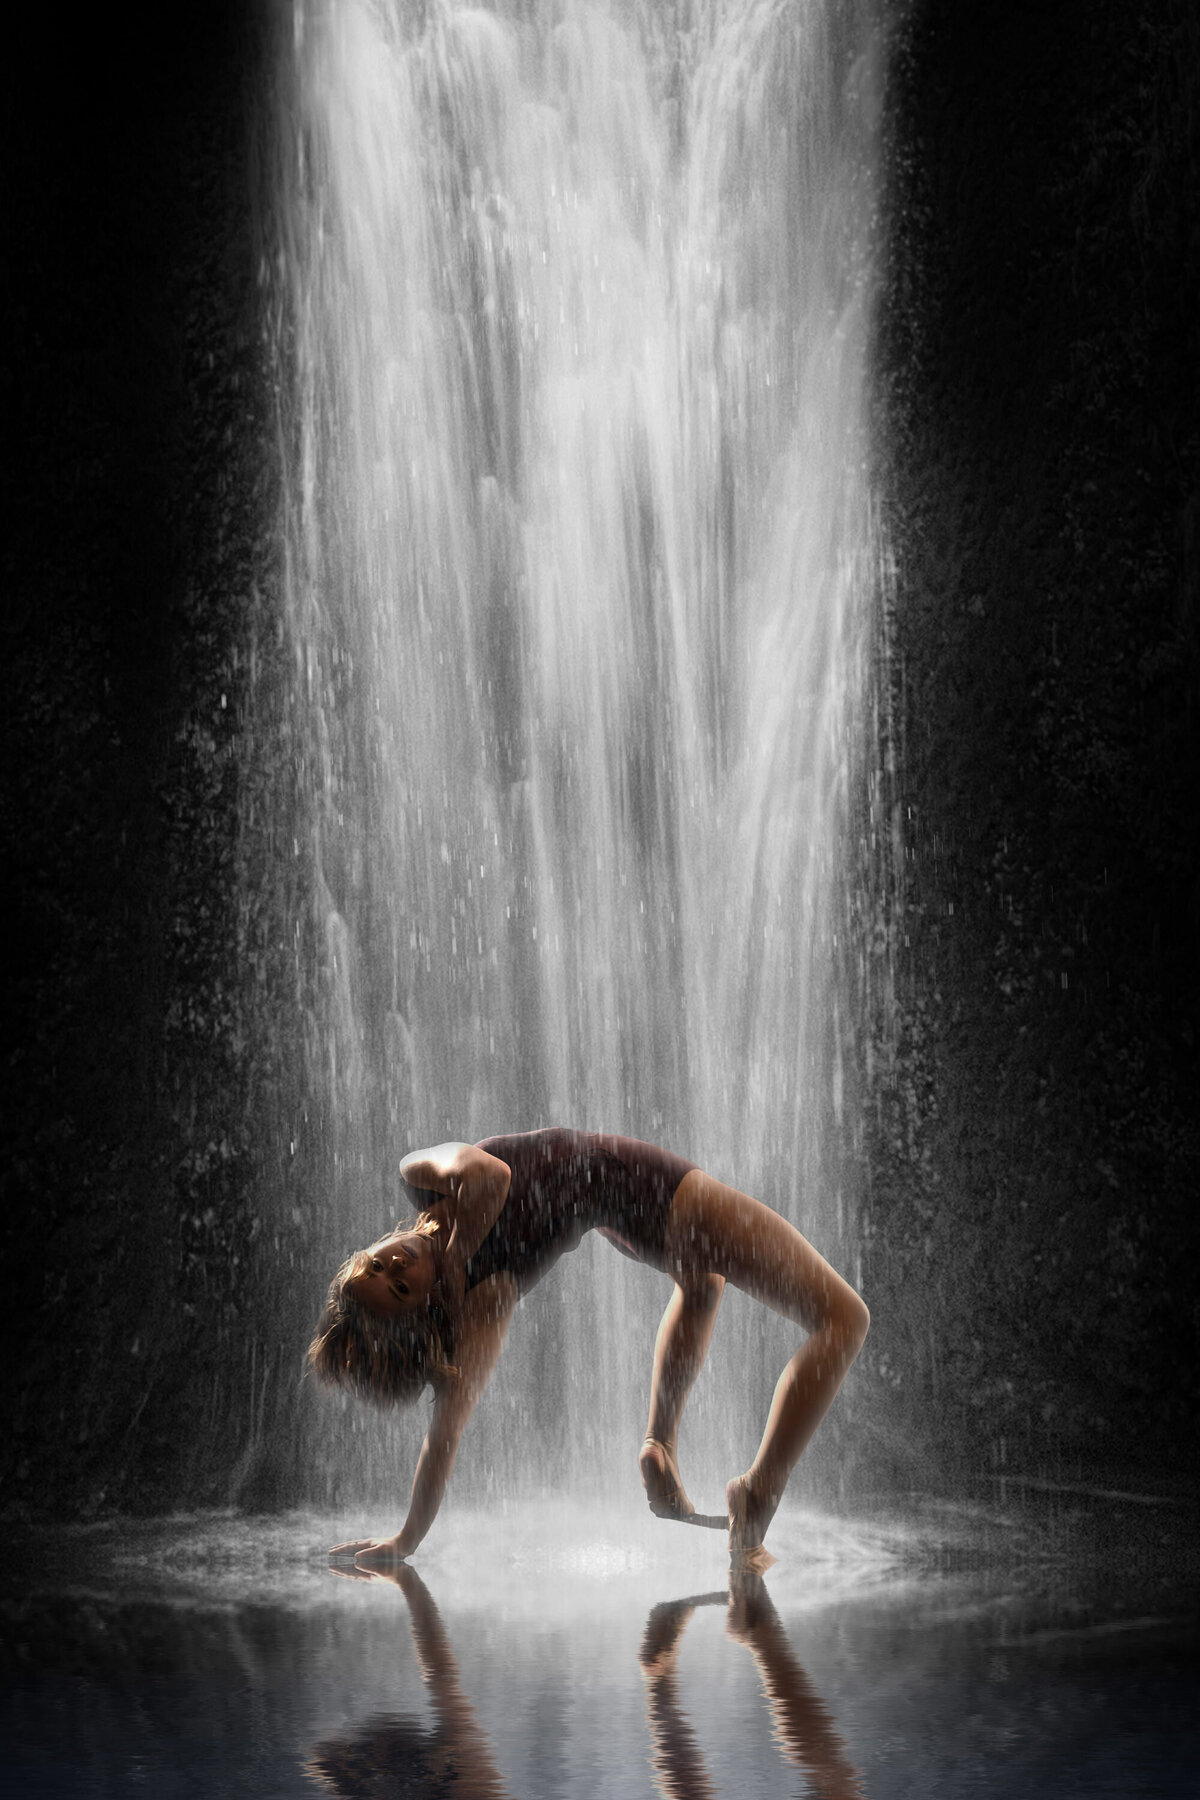 A modern dance student from Germantown High School poses in a backbend with an A.I. waterfall cascading upon her for this artistic portrait in her senior year.